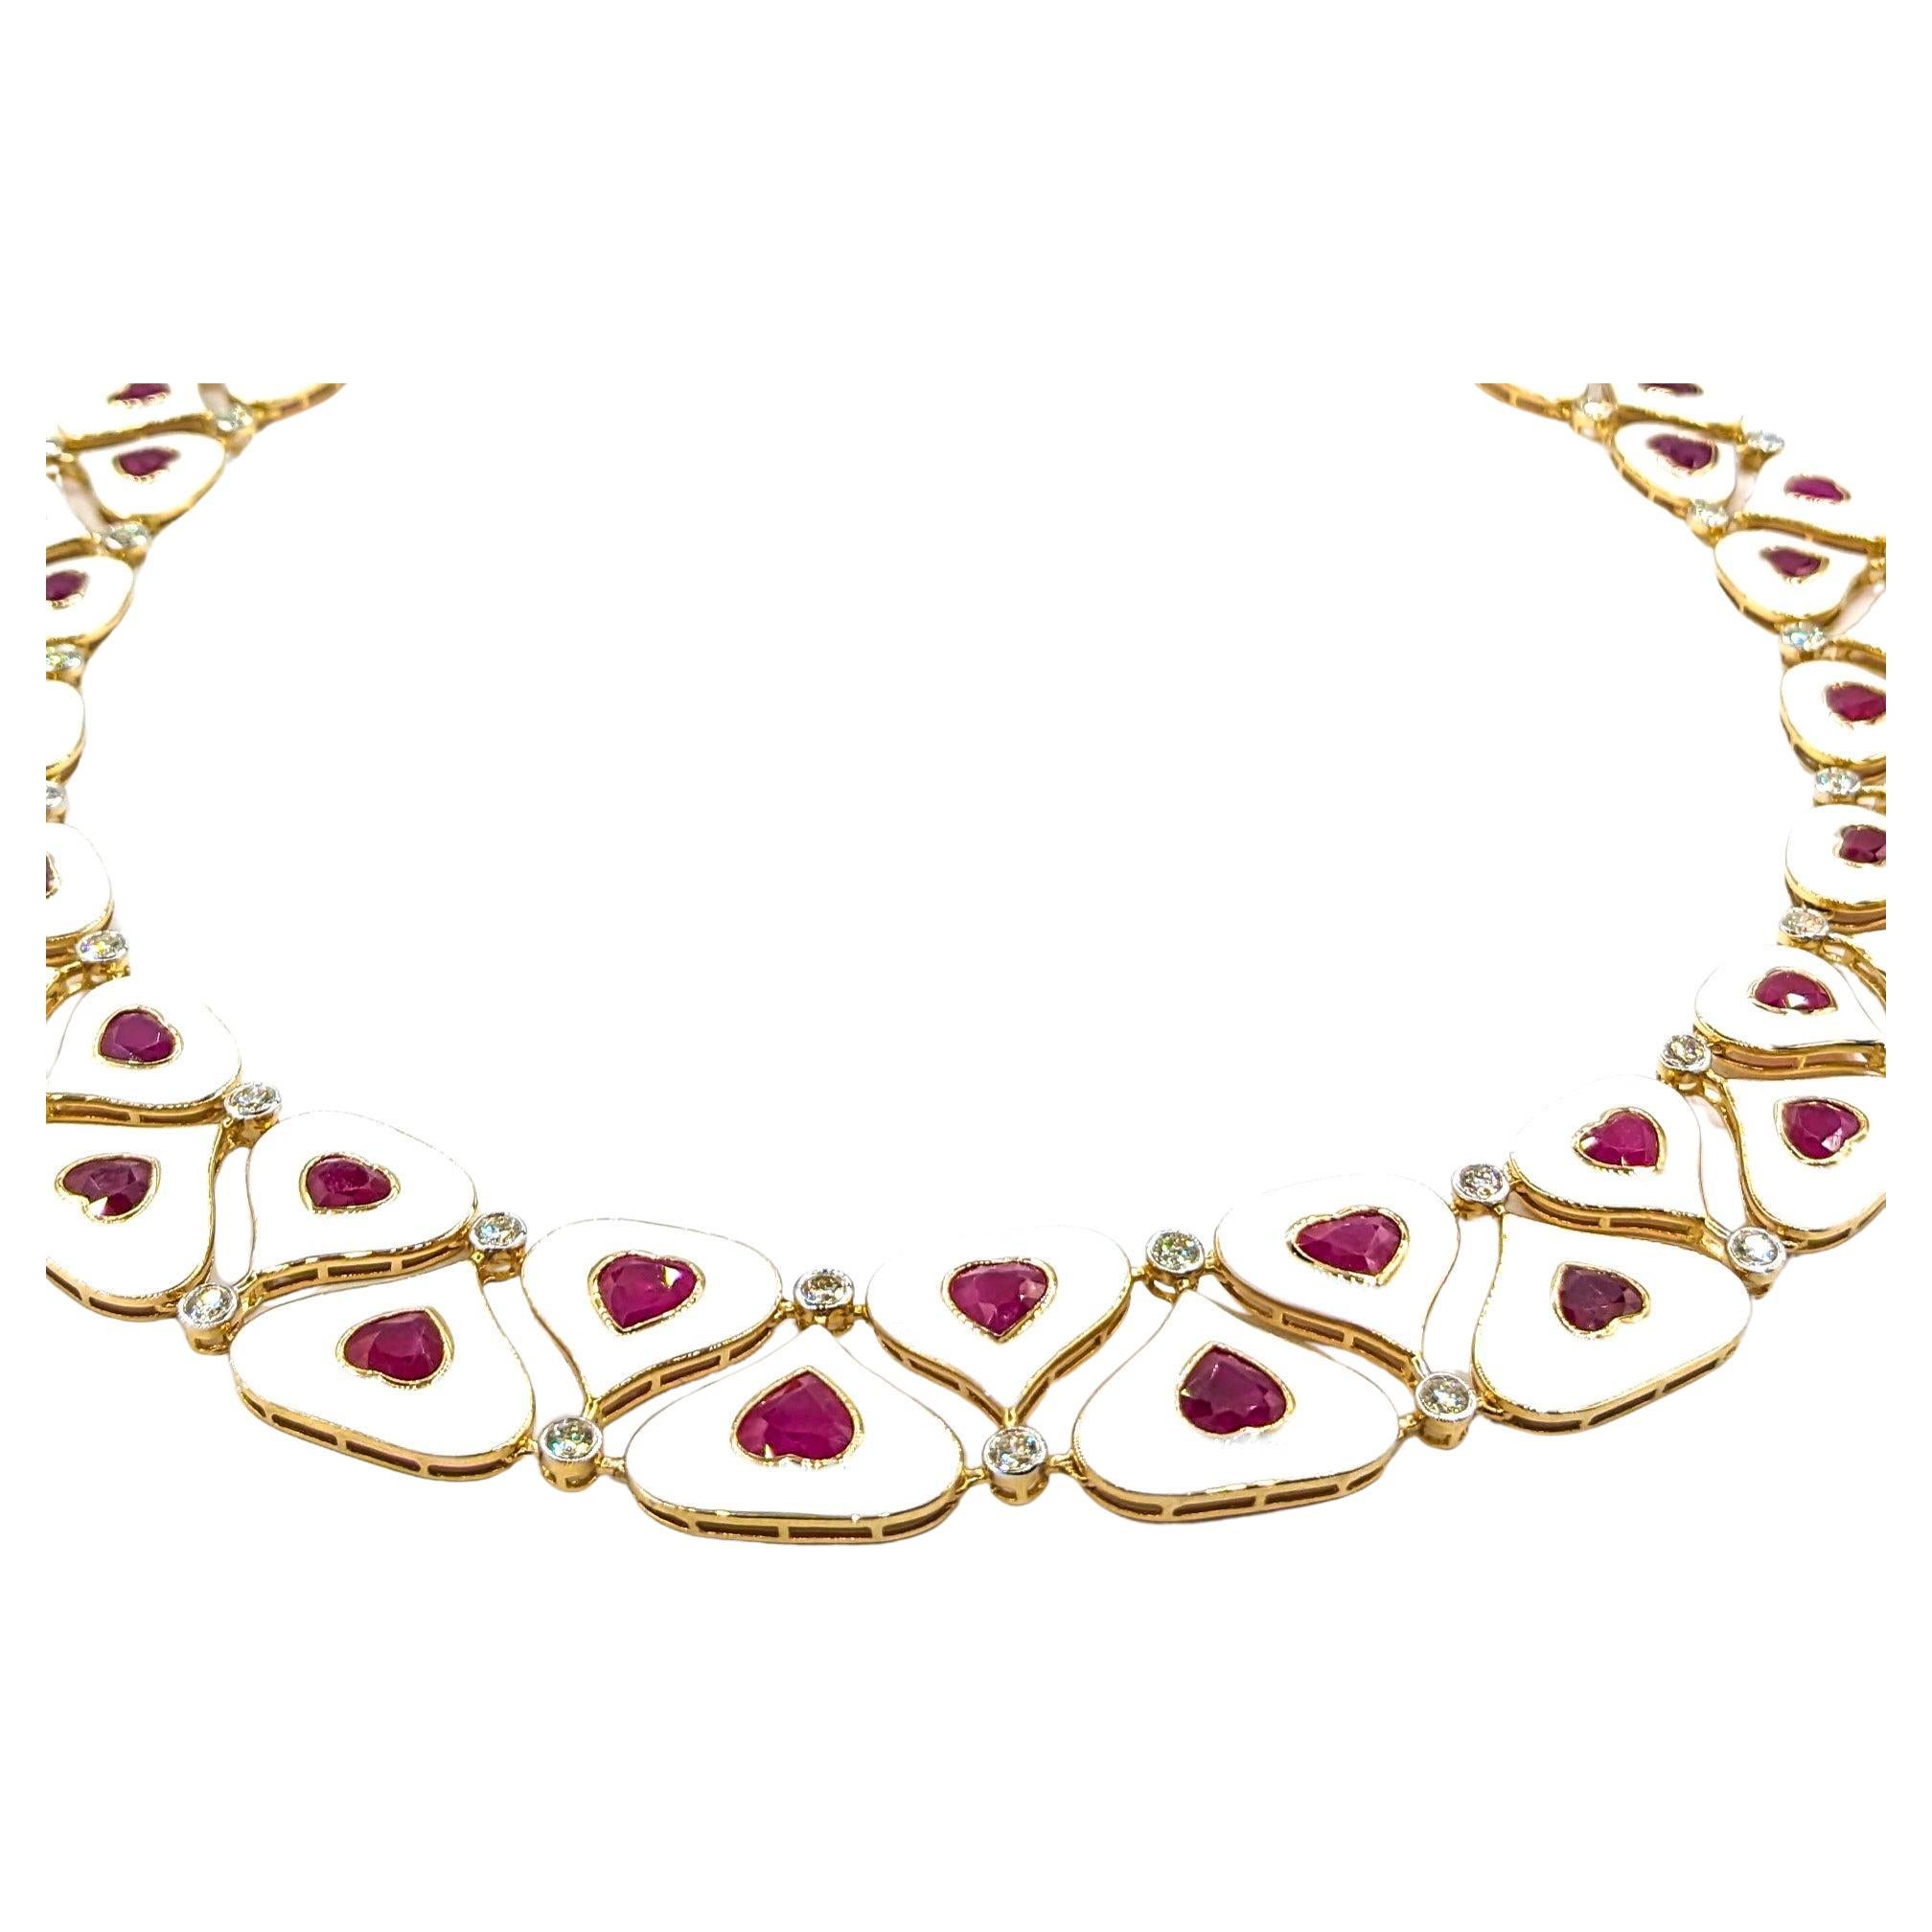 36.93ctw Hand White Enameled Burmese Rubies & 4.11ctw Diamonds Necklace In Yello For Sale